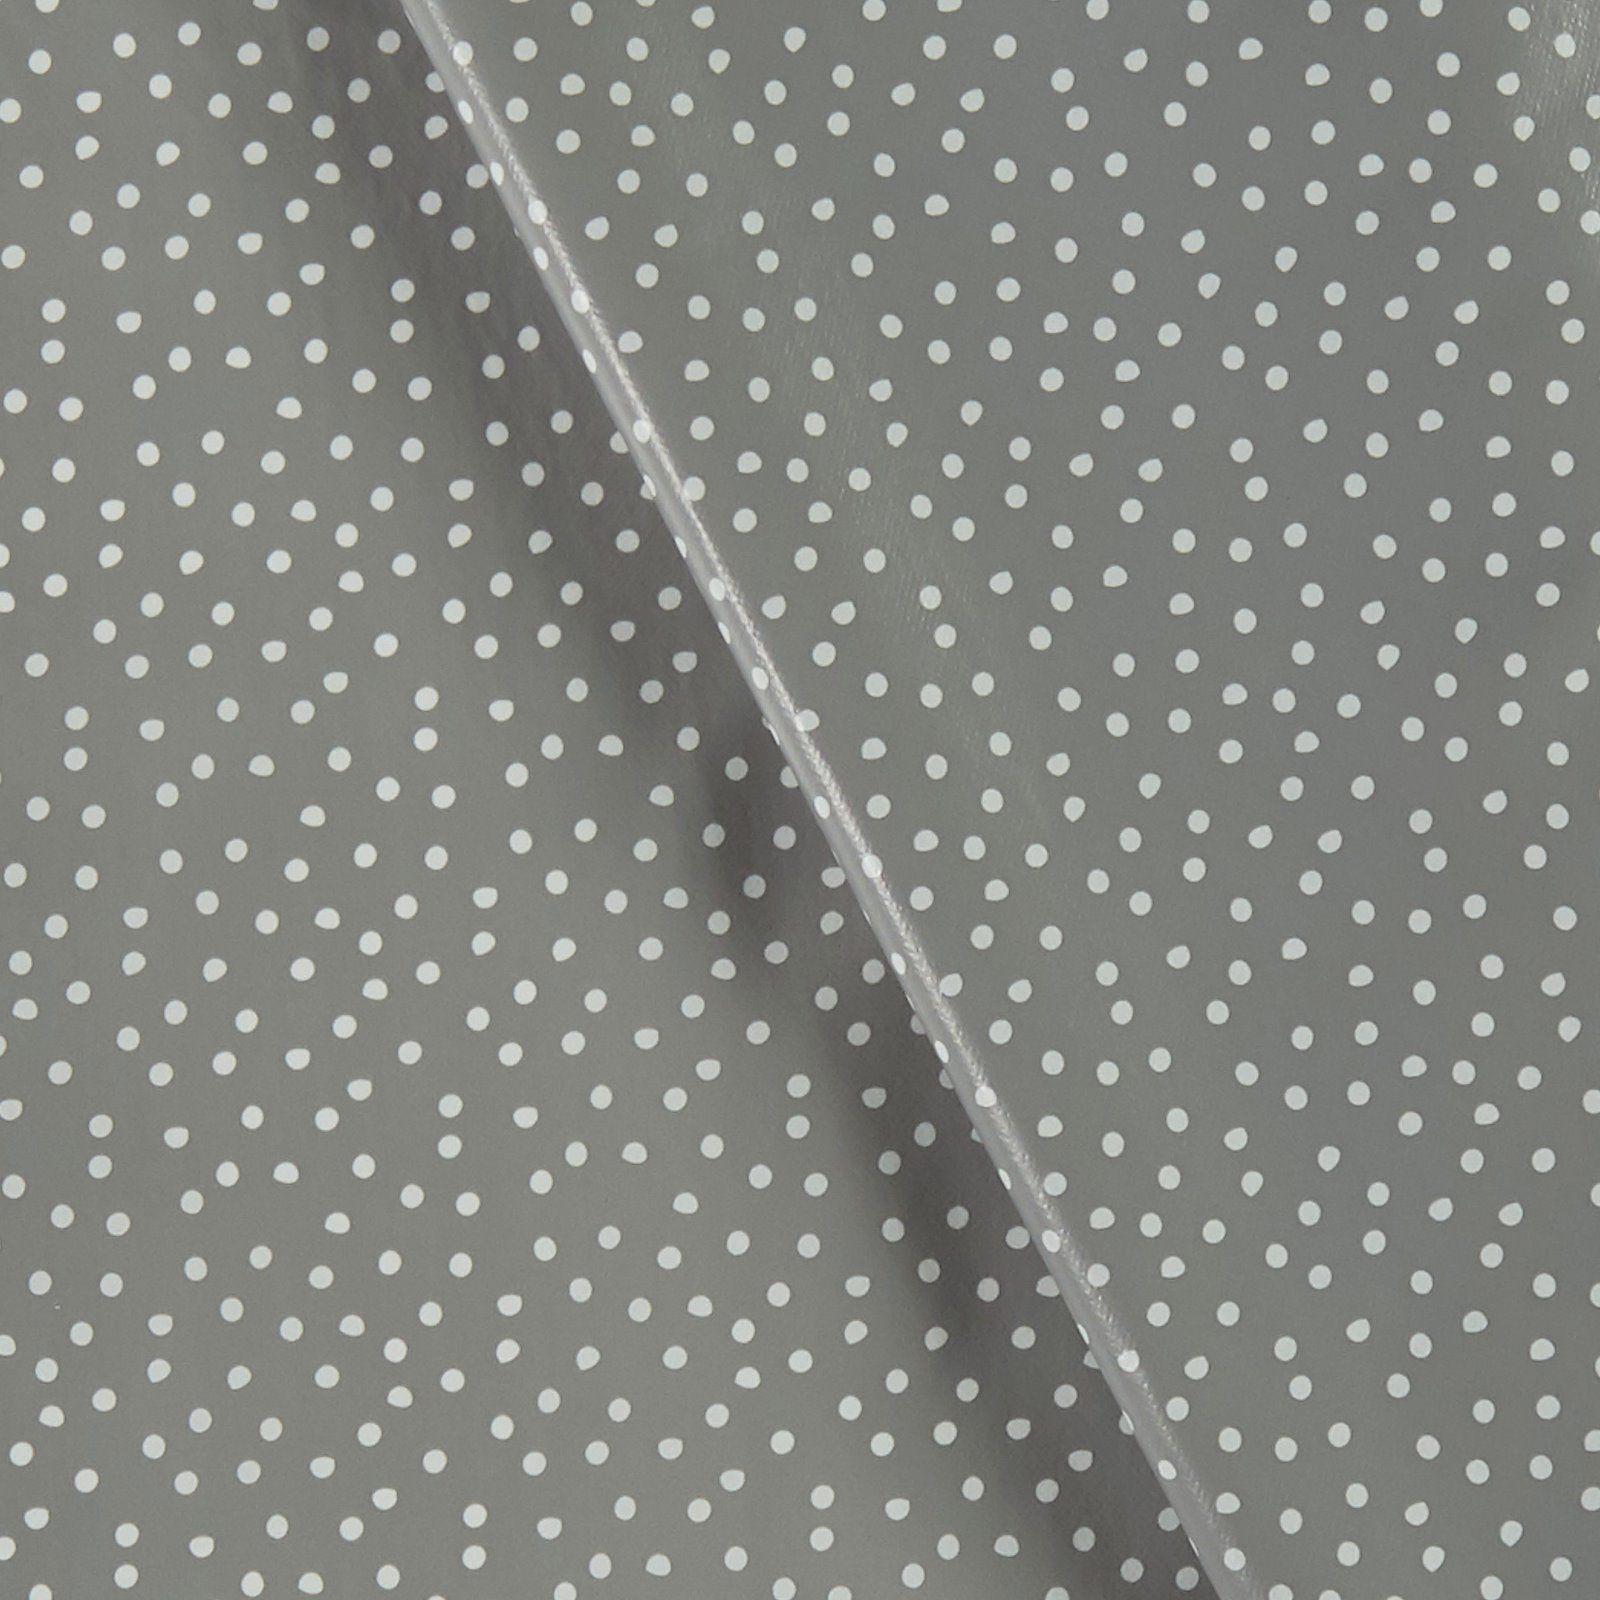 Non-woven oilcloth lt grey w white dots 866151_pack